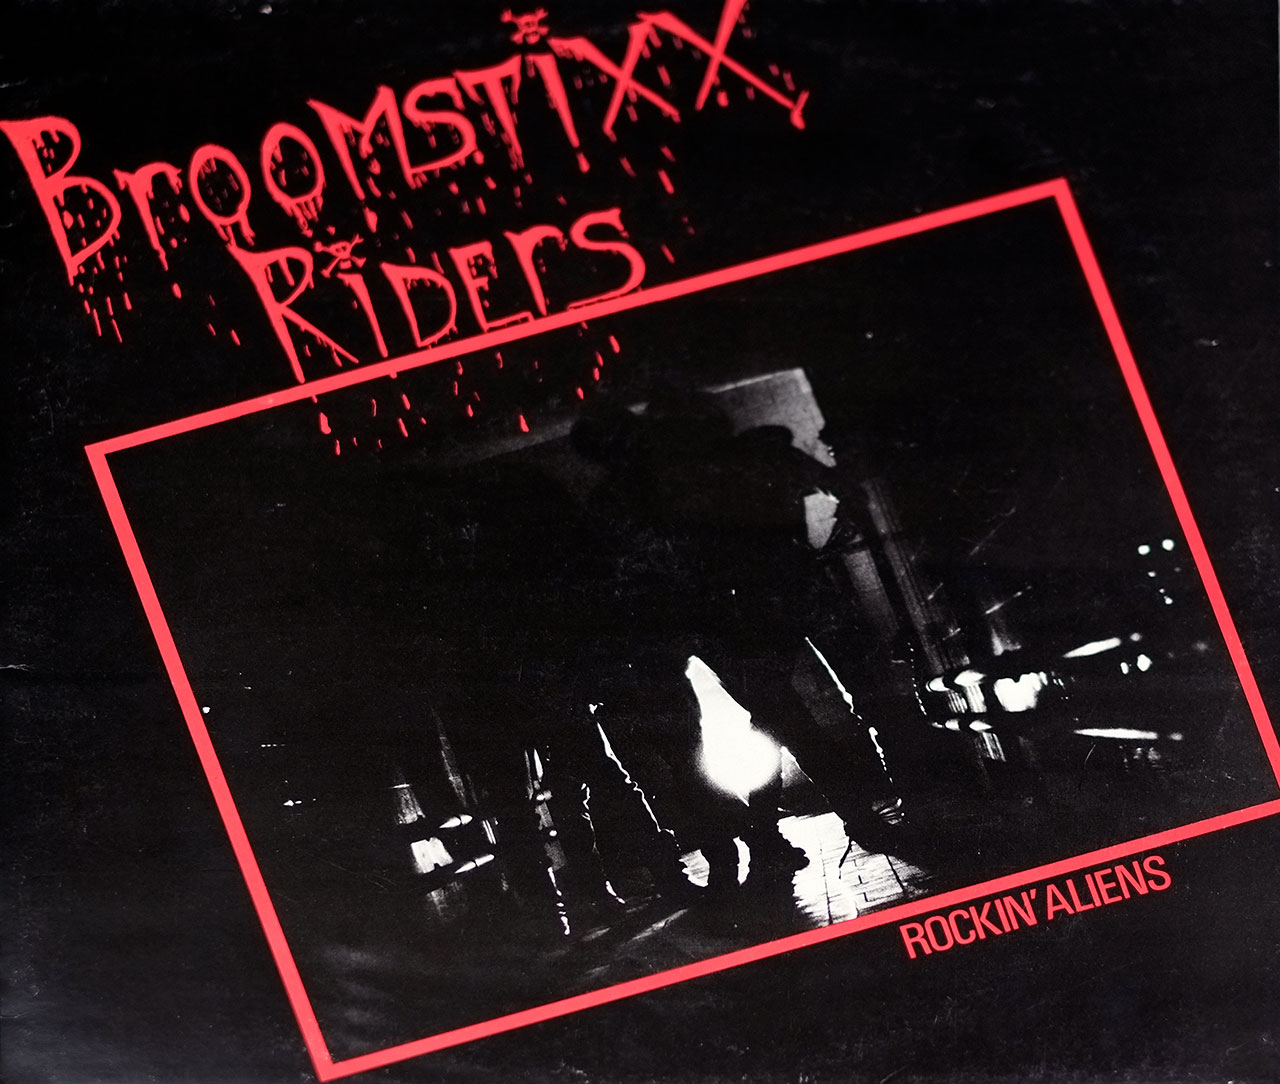 Album Front Cover Photo of BROOMSTIXX RIDERS ROCKIN' ALIENS PRIVATE SWISS HEAVY METAL 